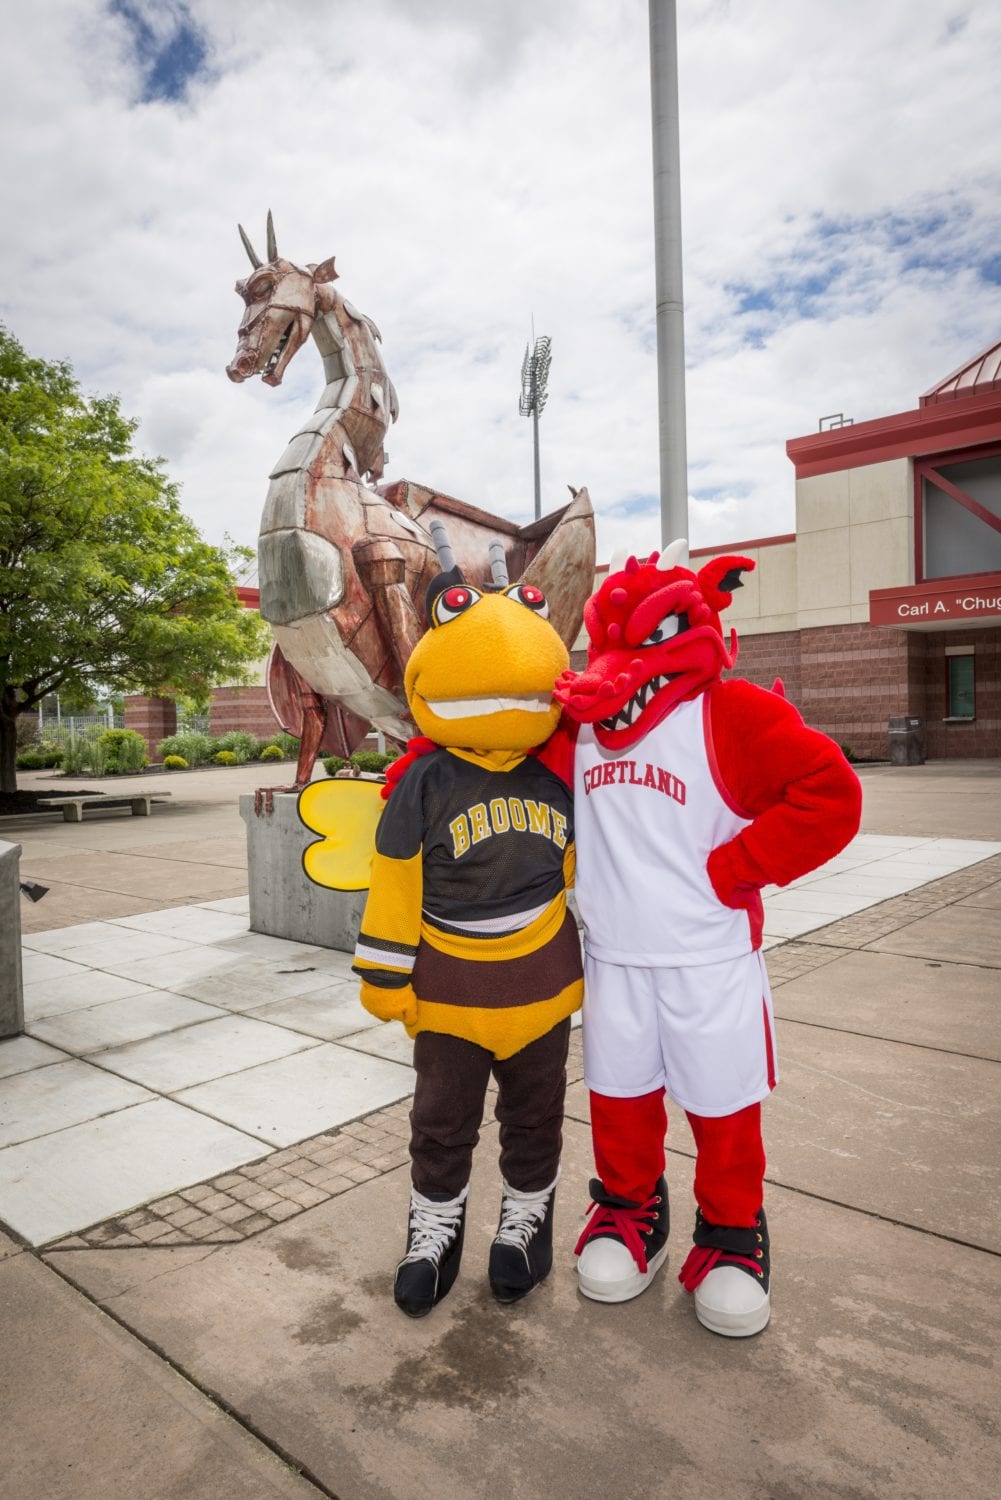 Interested in SUNY Cortland? Make an appointment with your transfer guide